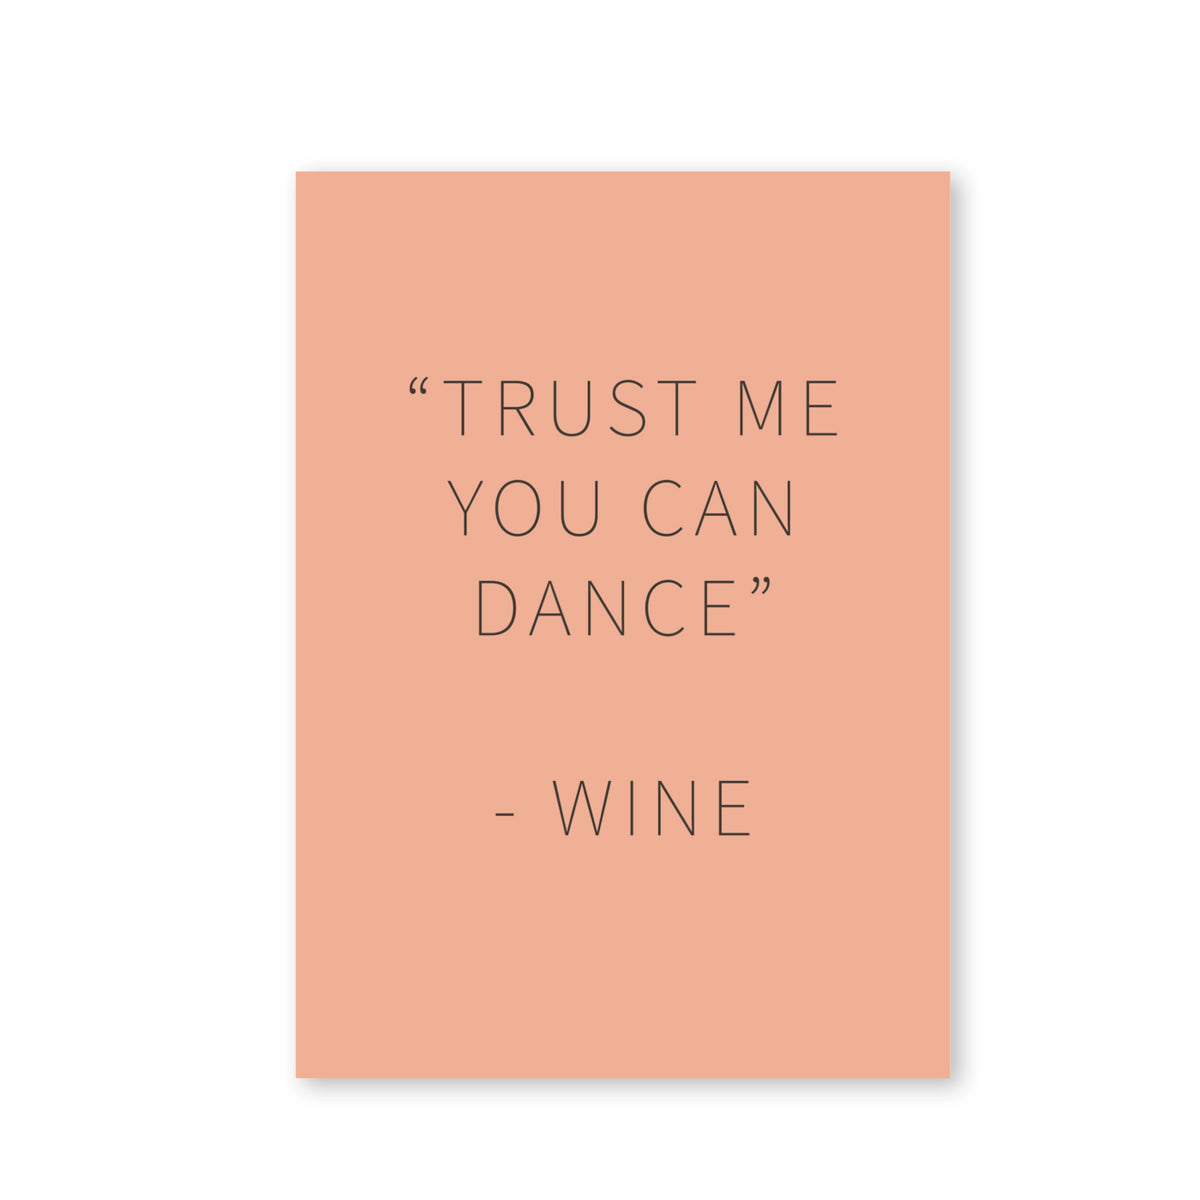 "Trust me, you can dance" - Wine